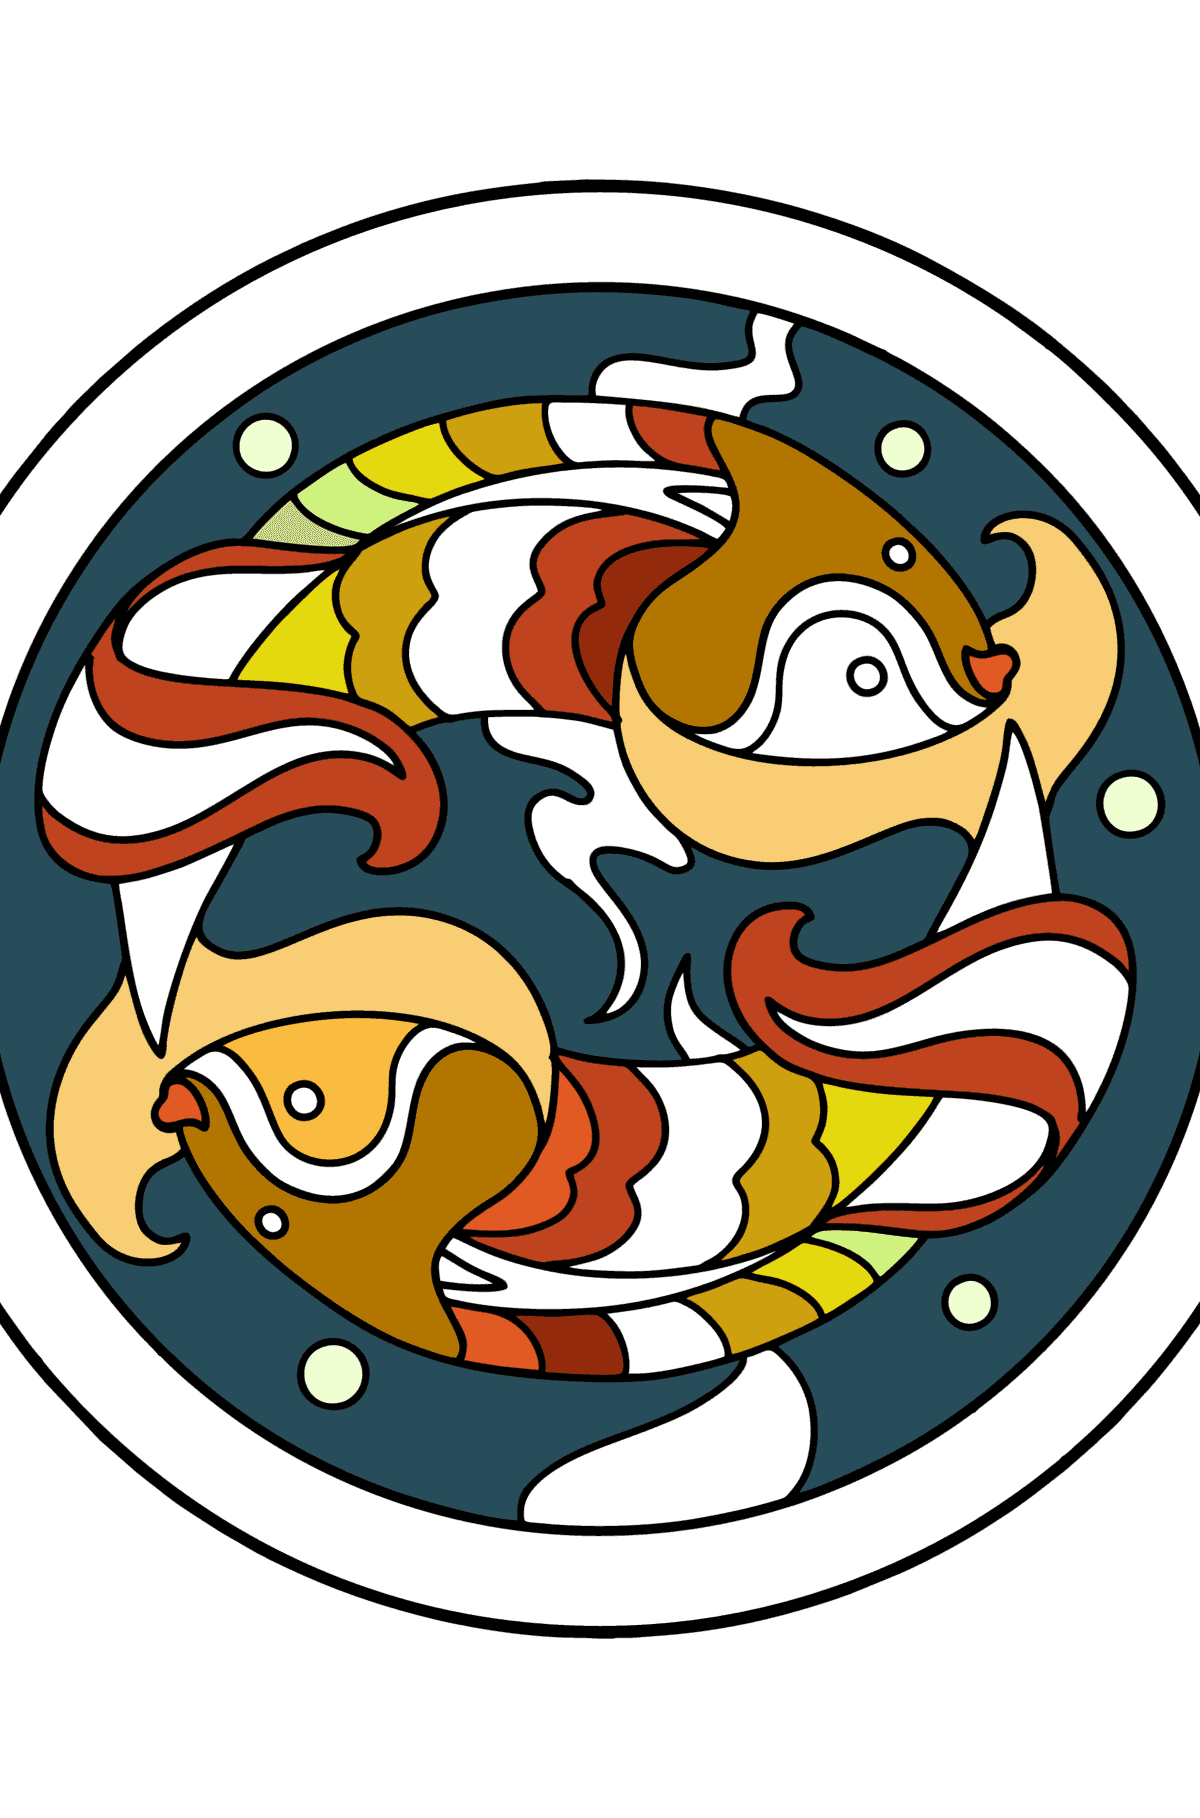 Coloring page for kids - zodiac sign Pisces - Coloring Pages for Kids